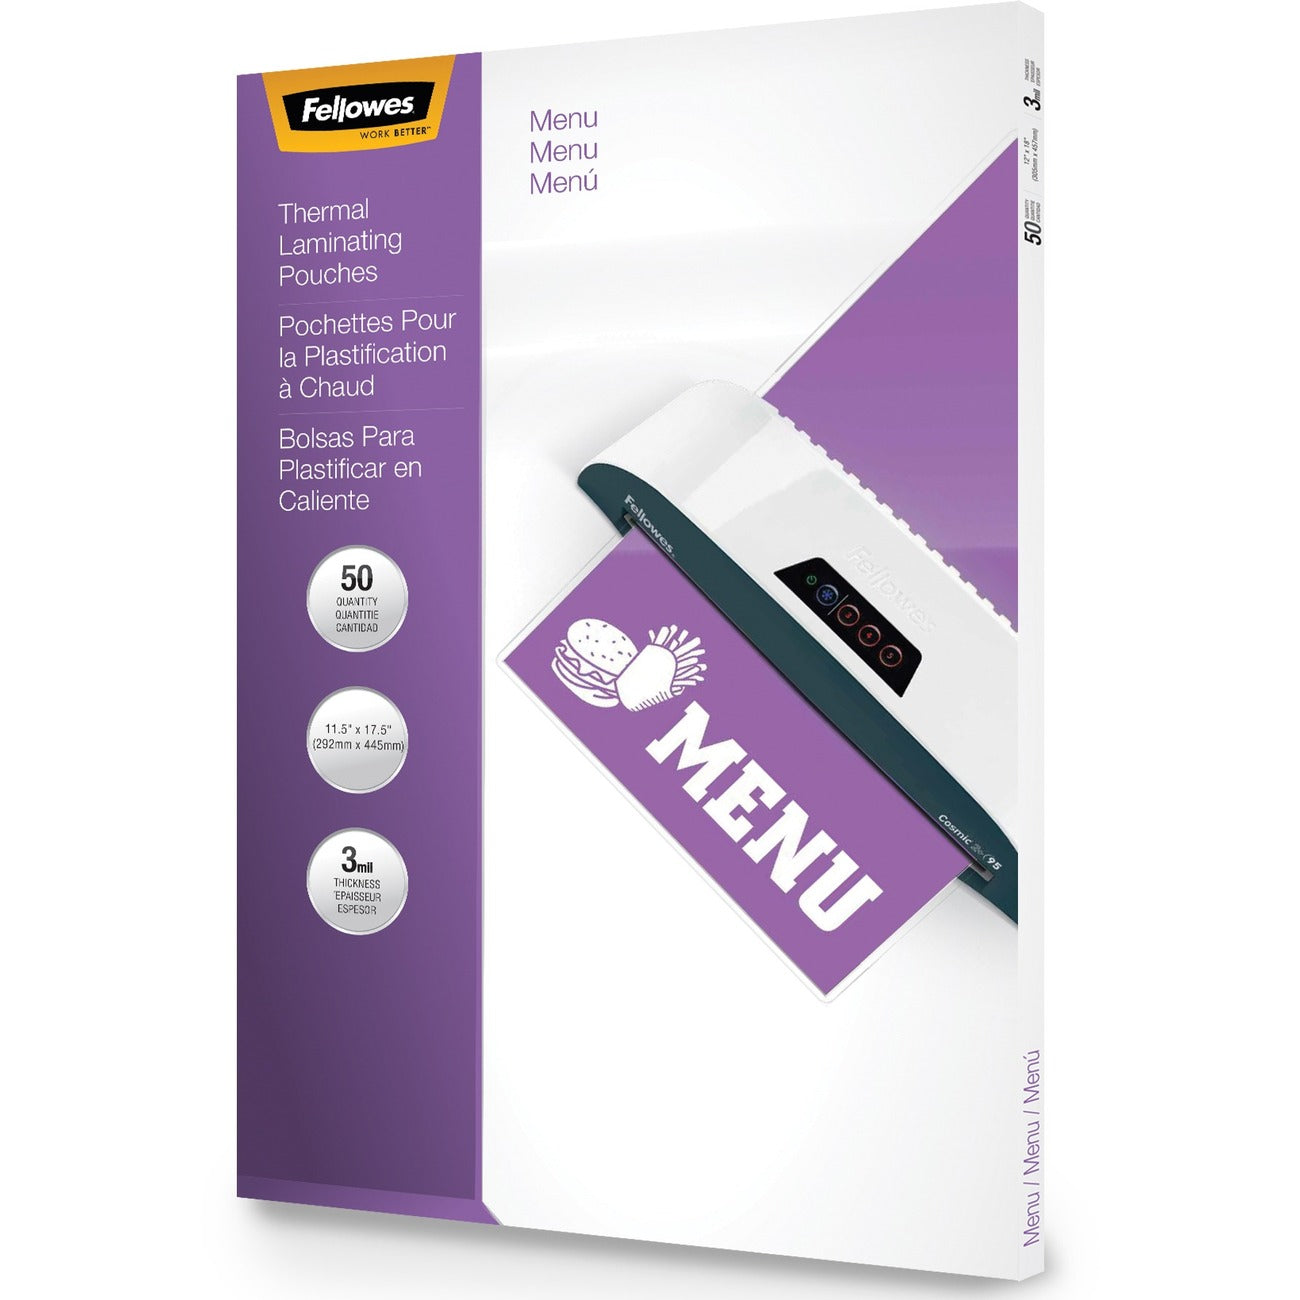 Fellowes Menu Size Laminating Thermal Pouches